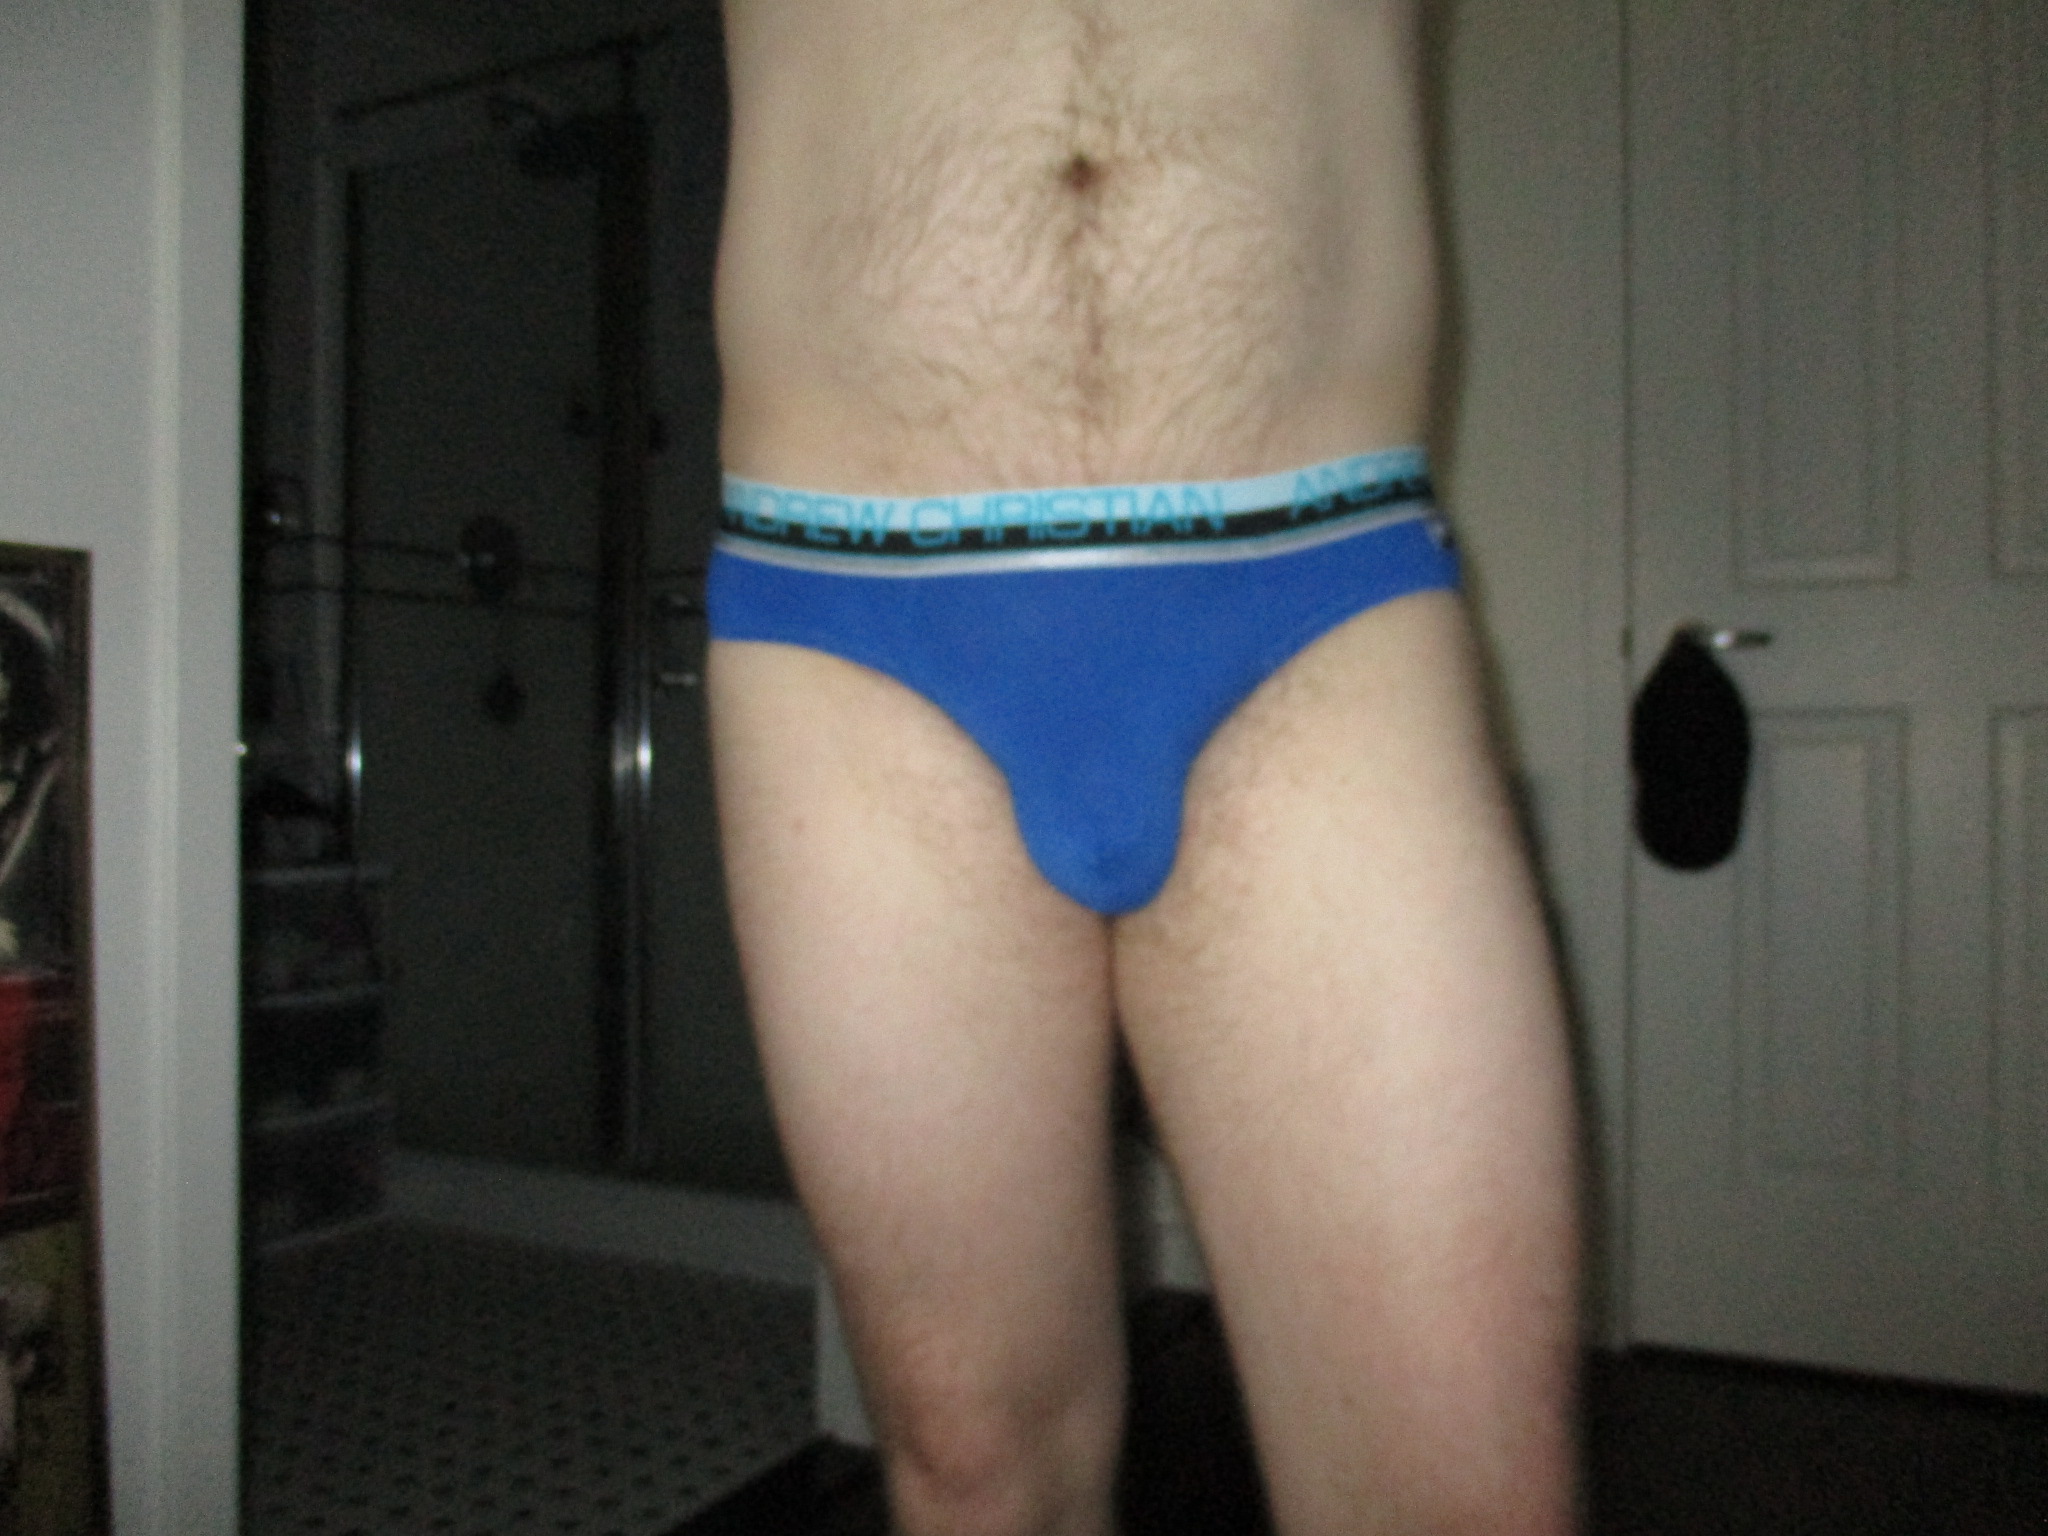 Royal briefs for Candy Sale day, aka – the Day After Valentines Day…